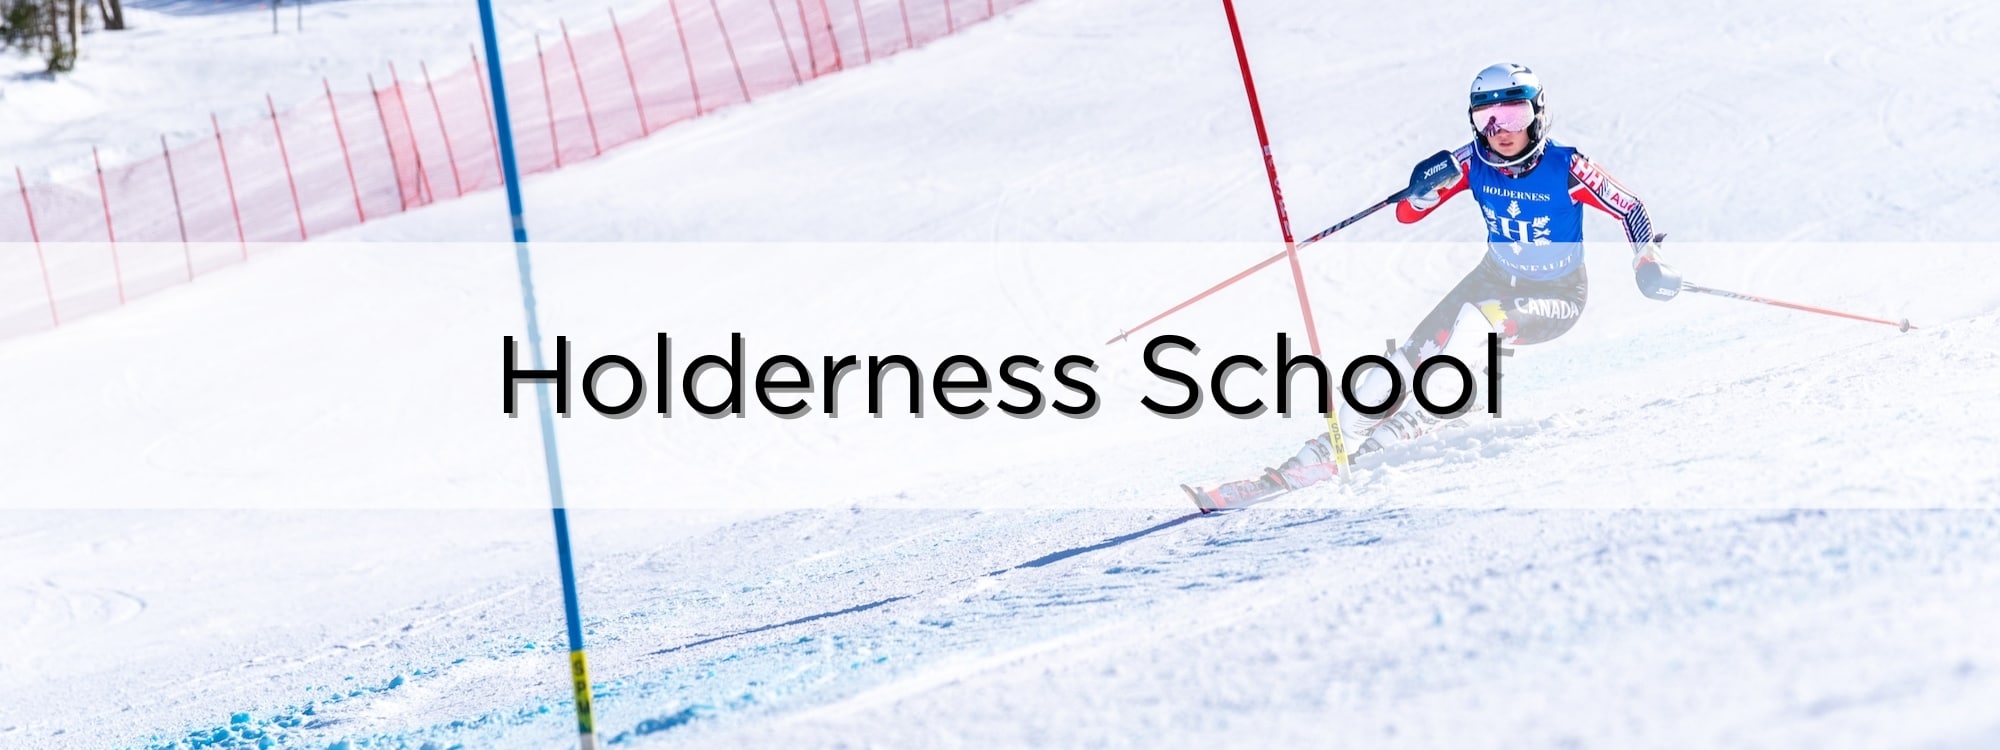 Holderness School is a boarding and day, multi-sport institution. Developing skill building, strength and inclusivity among student-athletes.